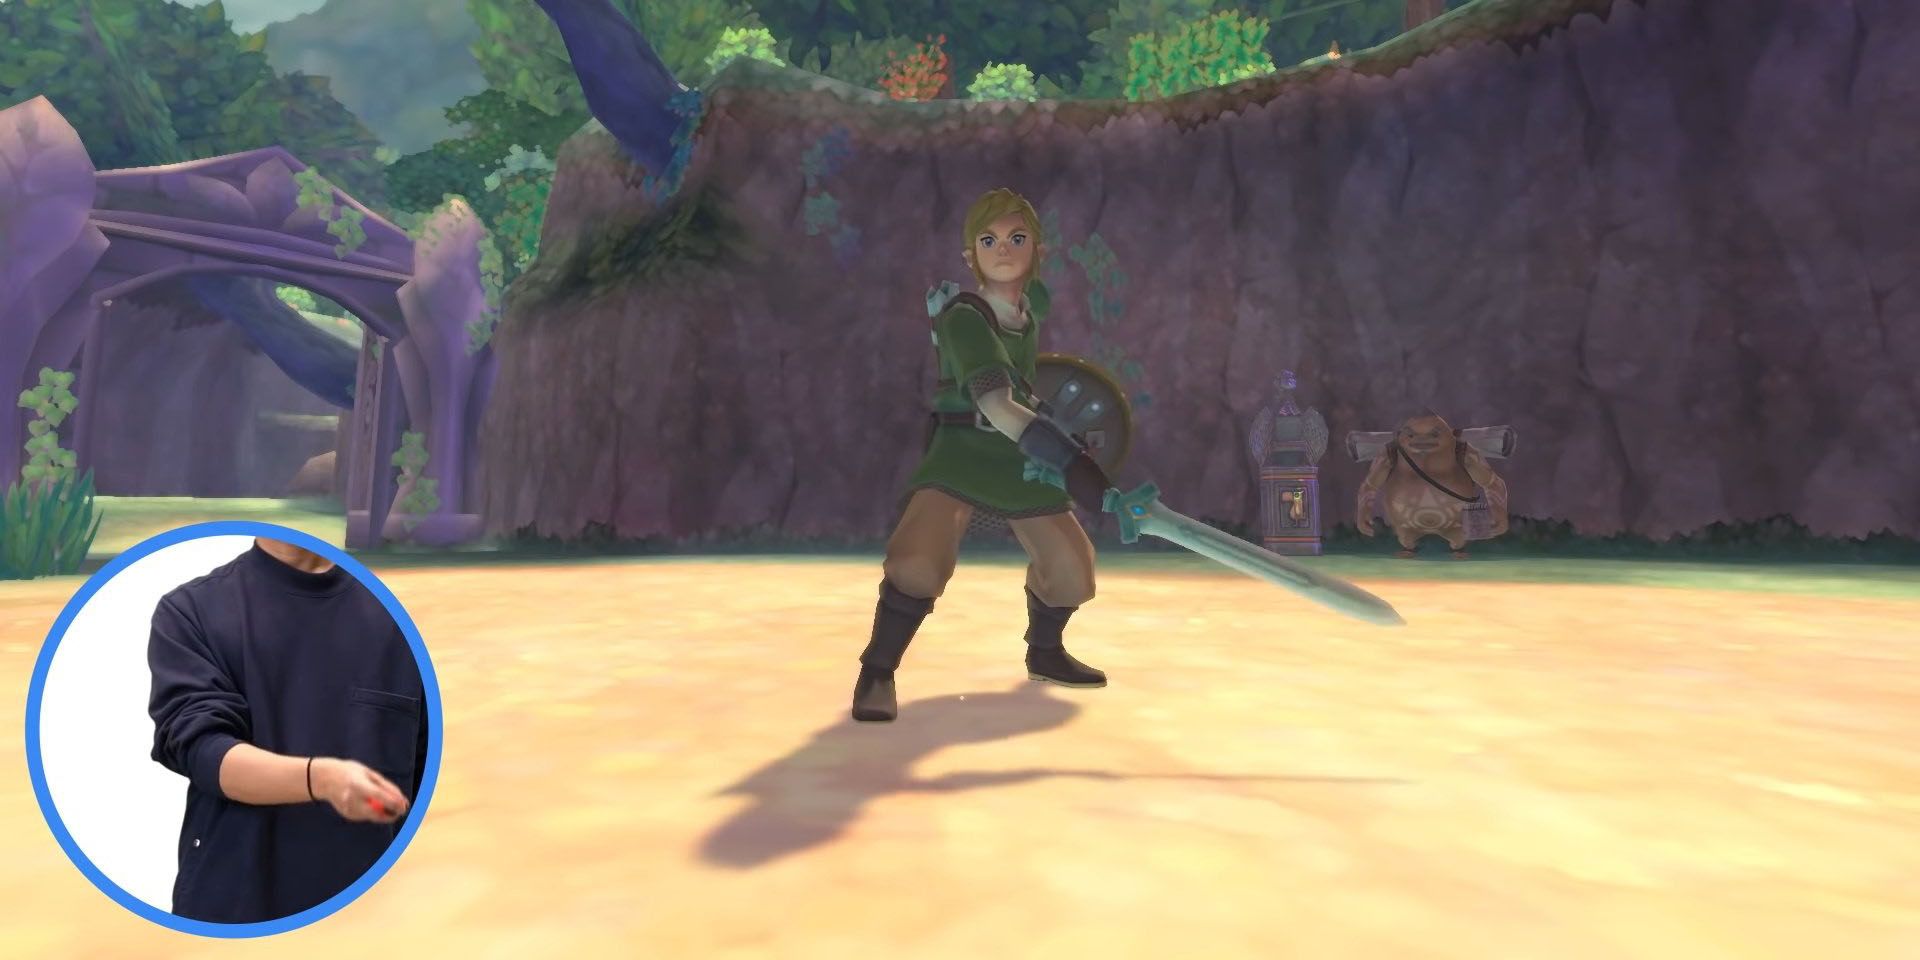 Skyward Sword HD Link Swinging Sword with Motion Control Example